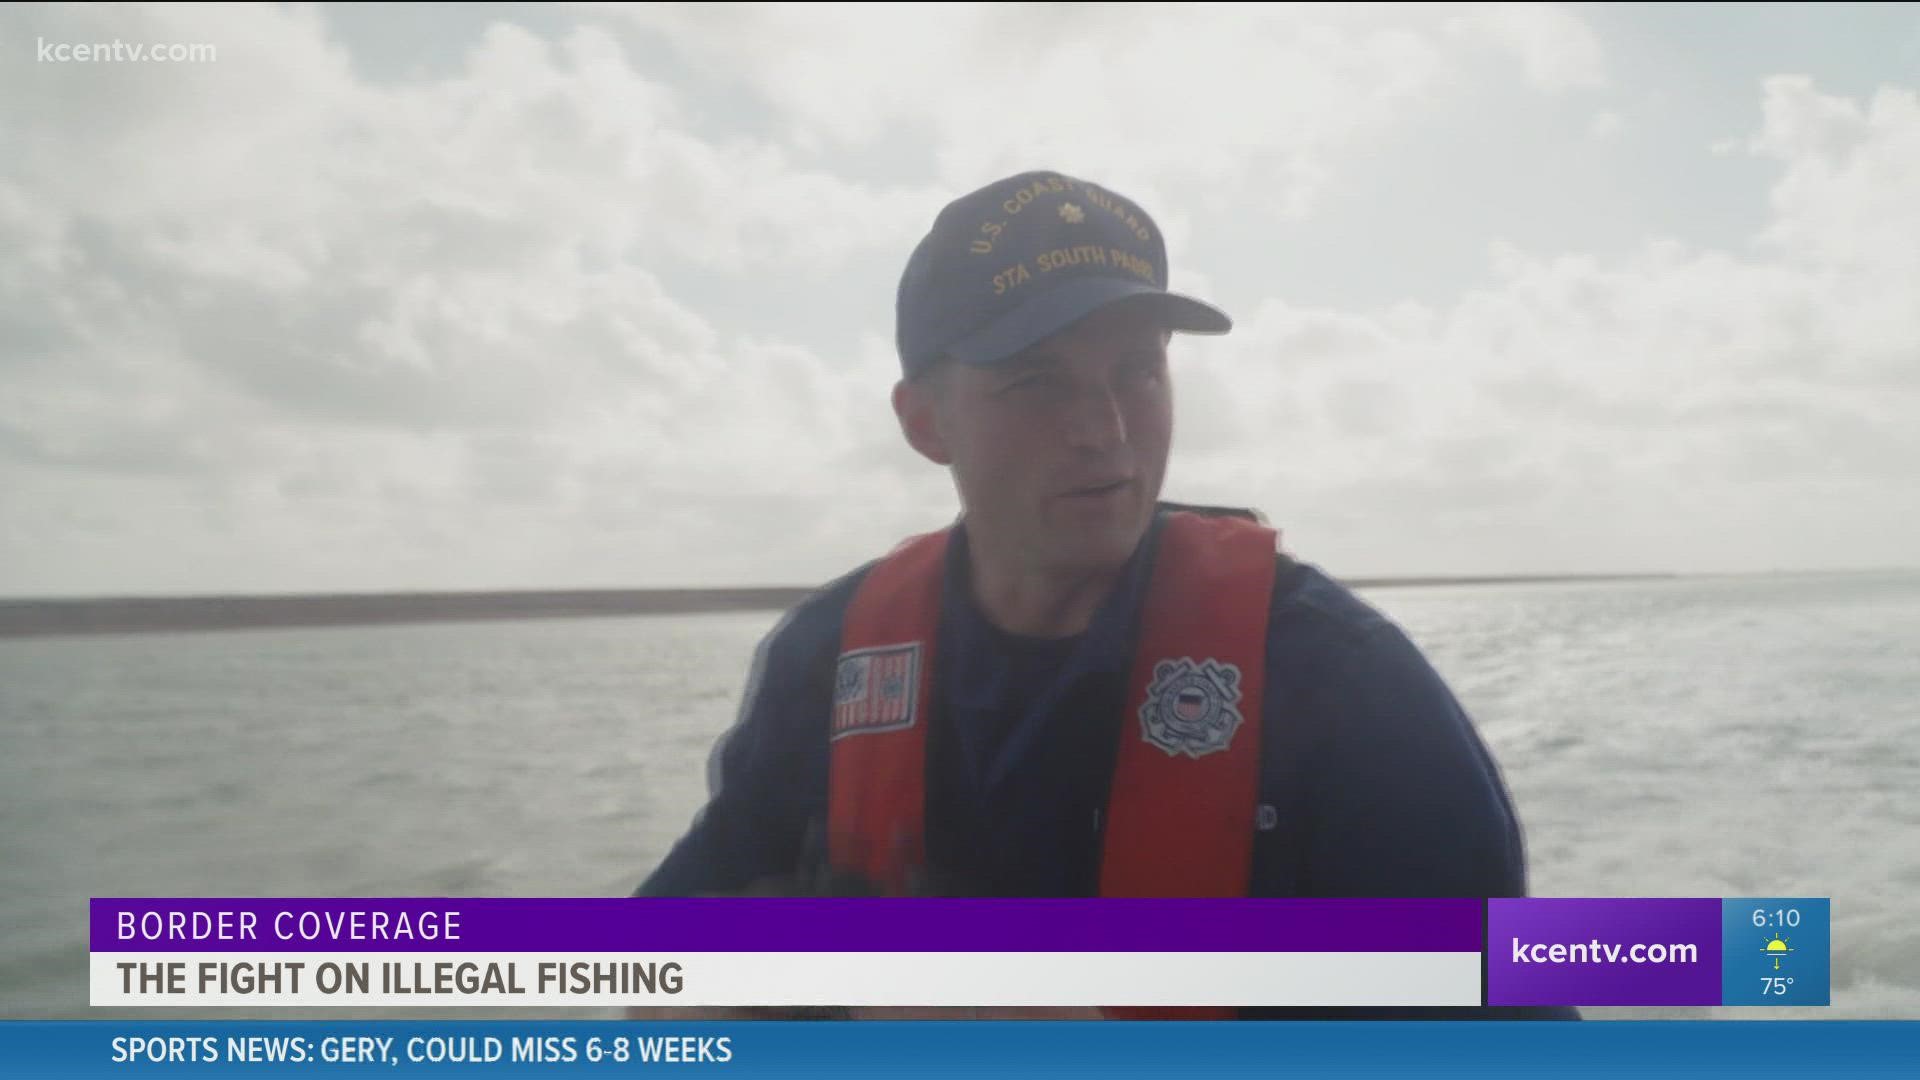 Last year the U.S. Coast Guard reported  78 boats seized and 208 fishermen detained.